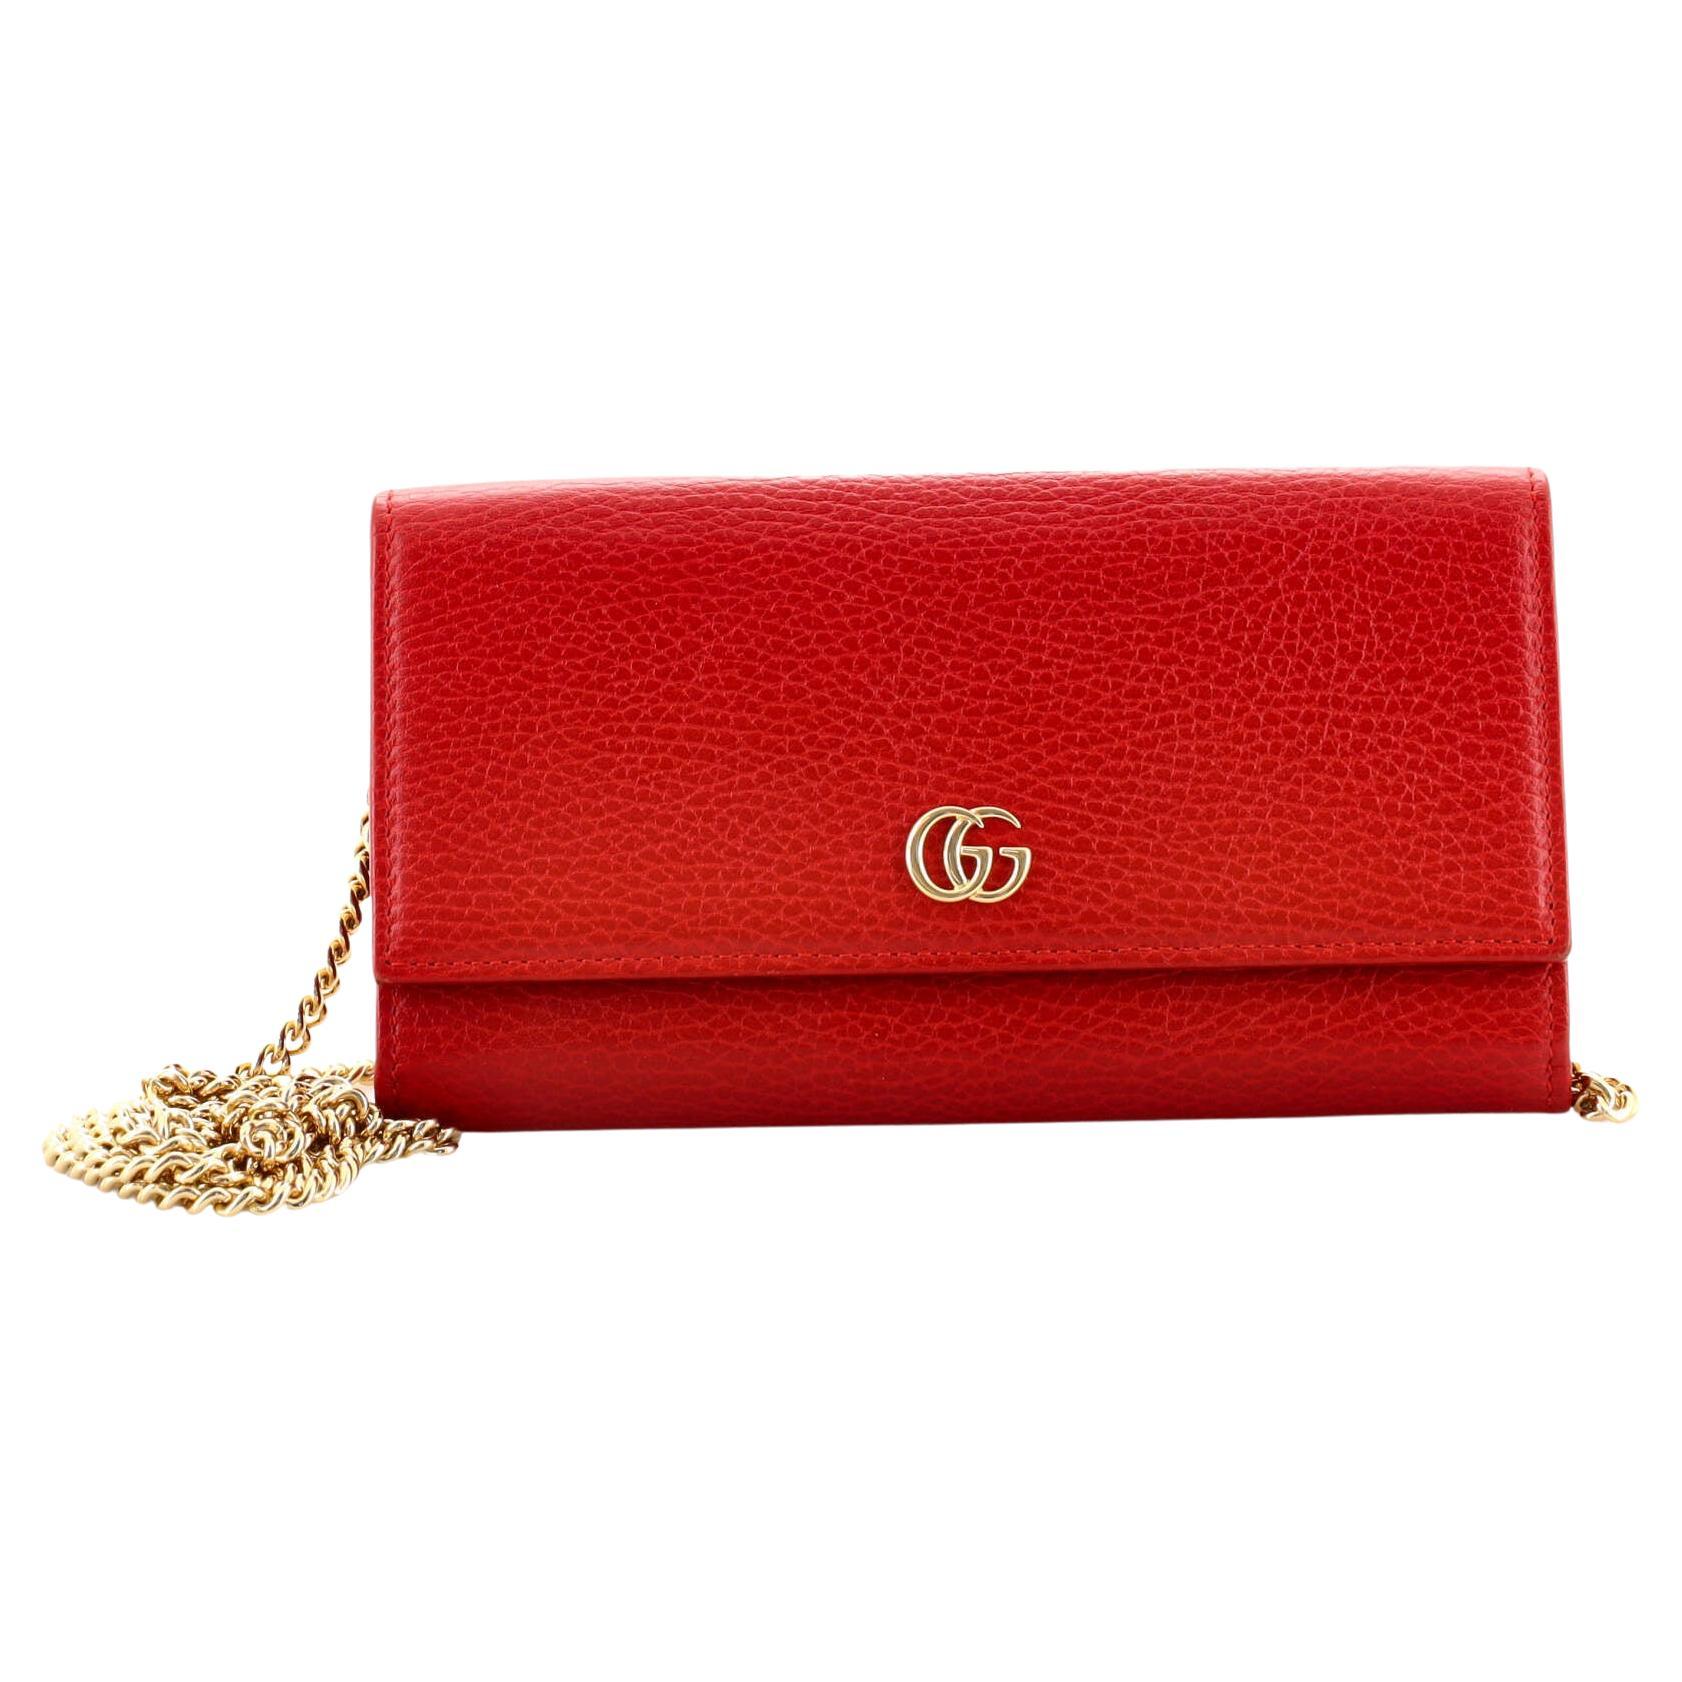 Gucci GG Marmont Continental Chain Wallet Leather